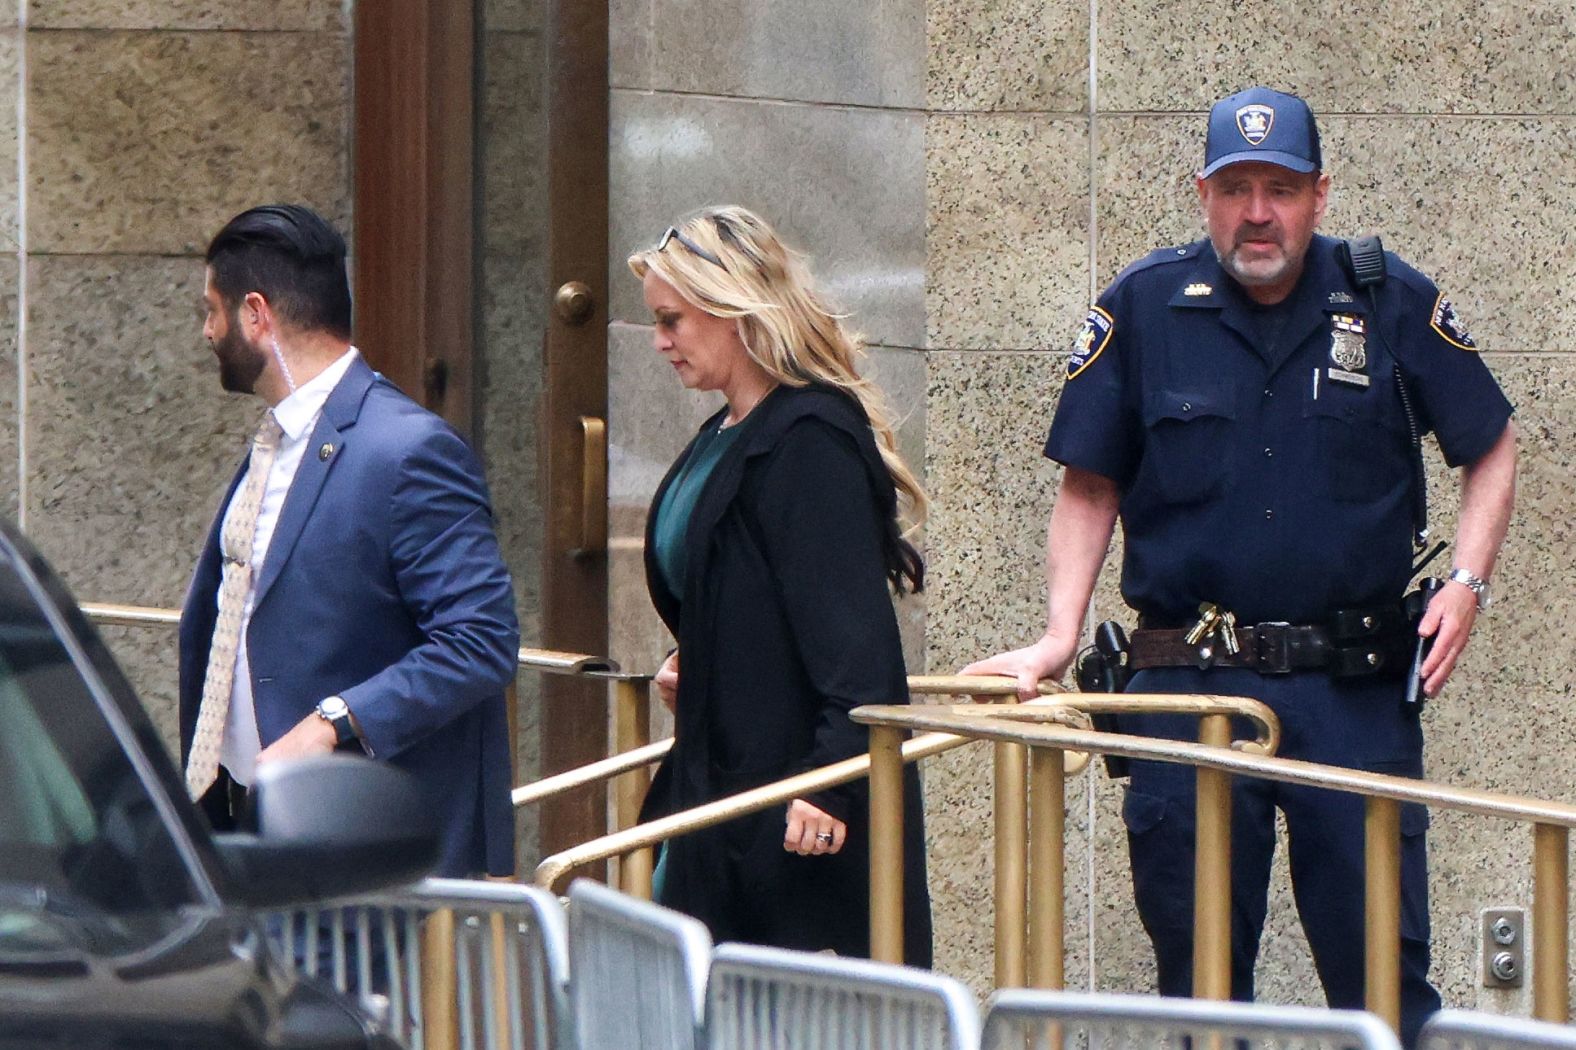 Daniels leaves Manhattan Criminal Court after <a href="index.php?page=&url=https%3A%2F%2Fwww.cnn.com%2Fpolitics%2Flive-news%2Ftrump-hush-money-trial-05-09-24%2Findex.html" target="_blank">testifying on May 9</a>.